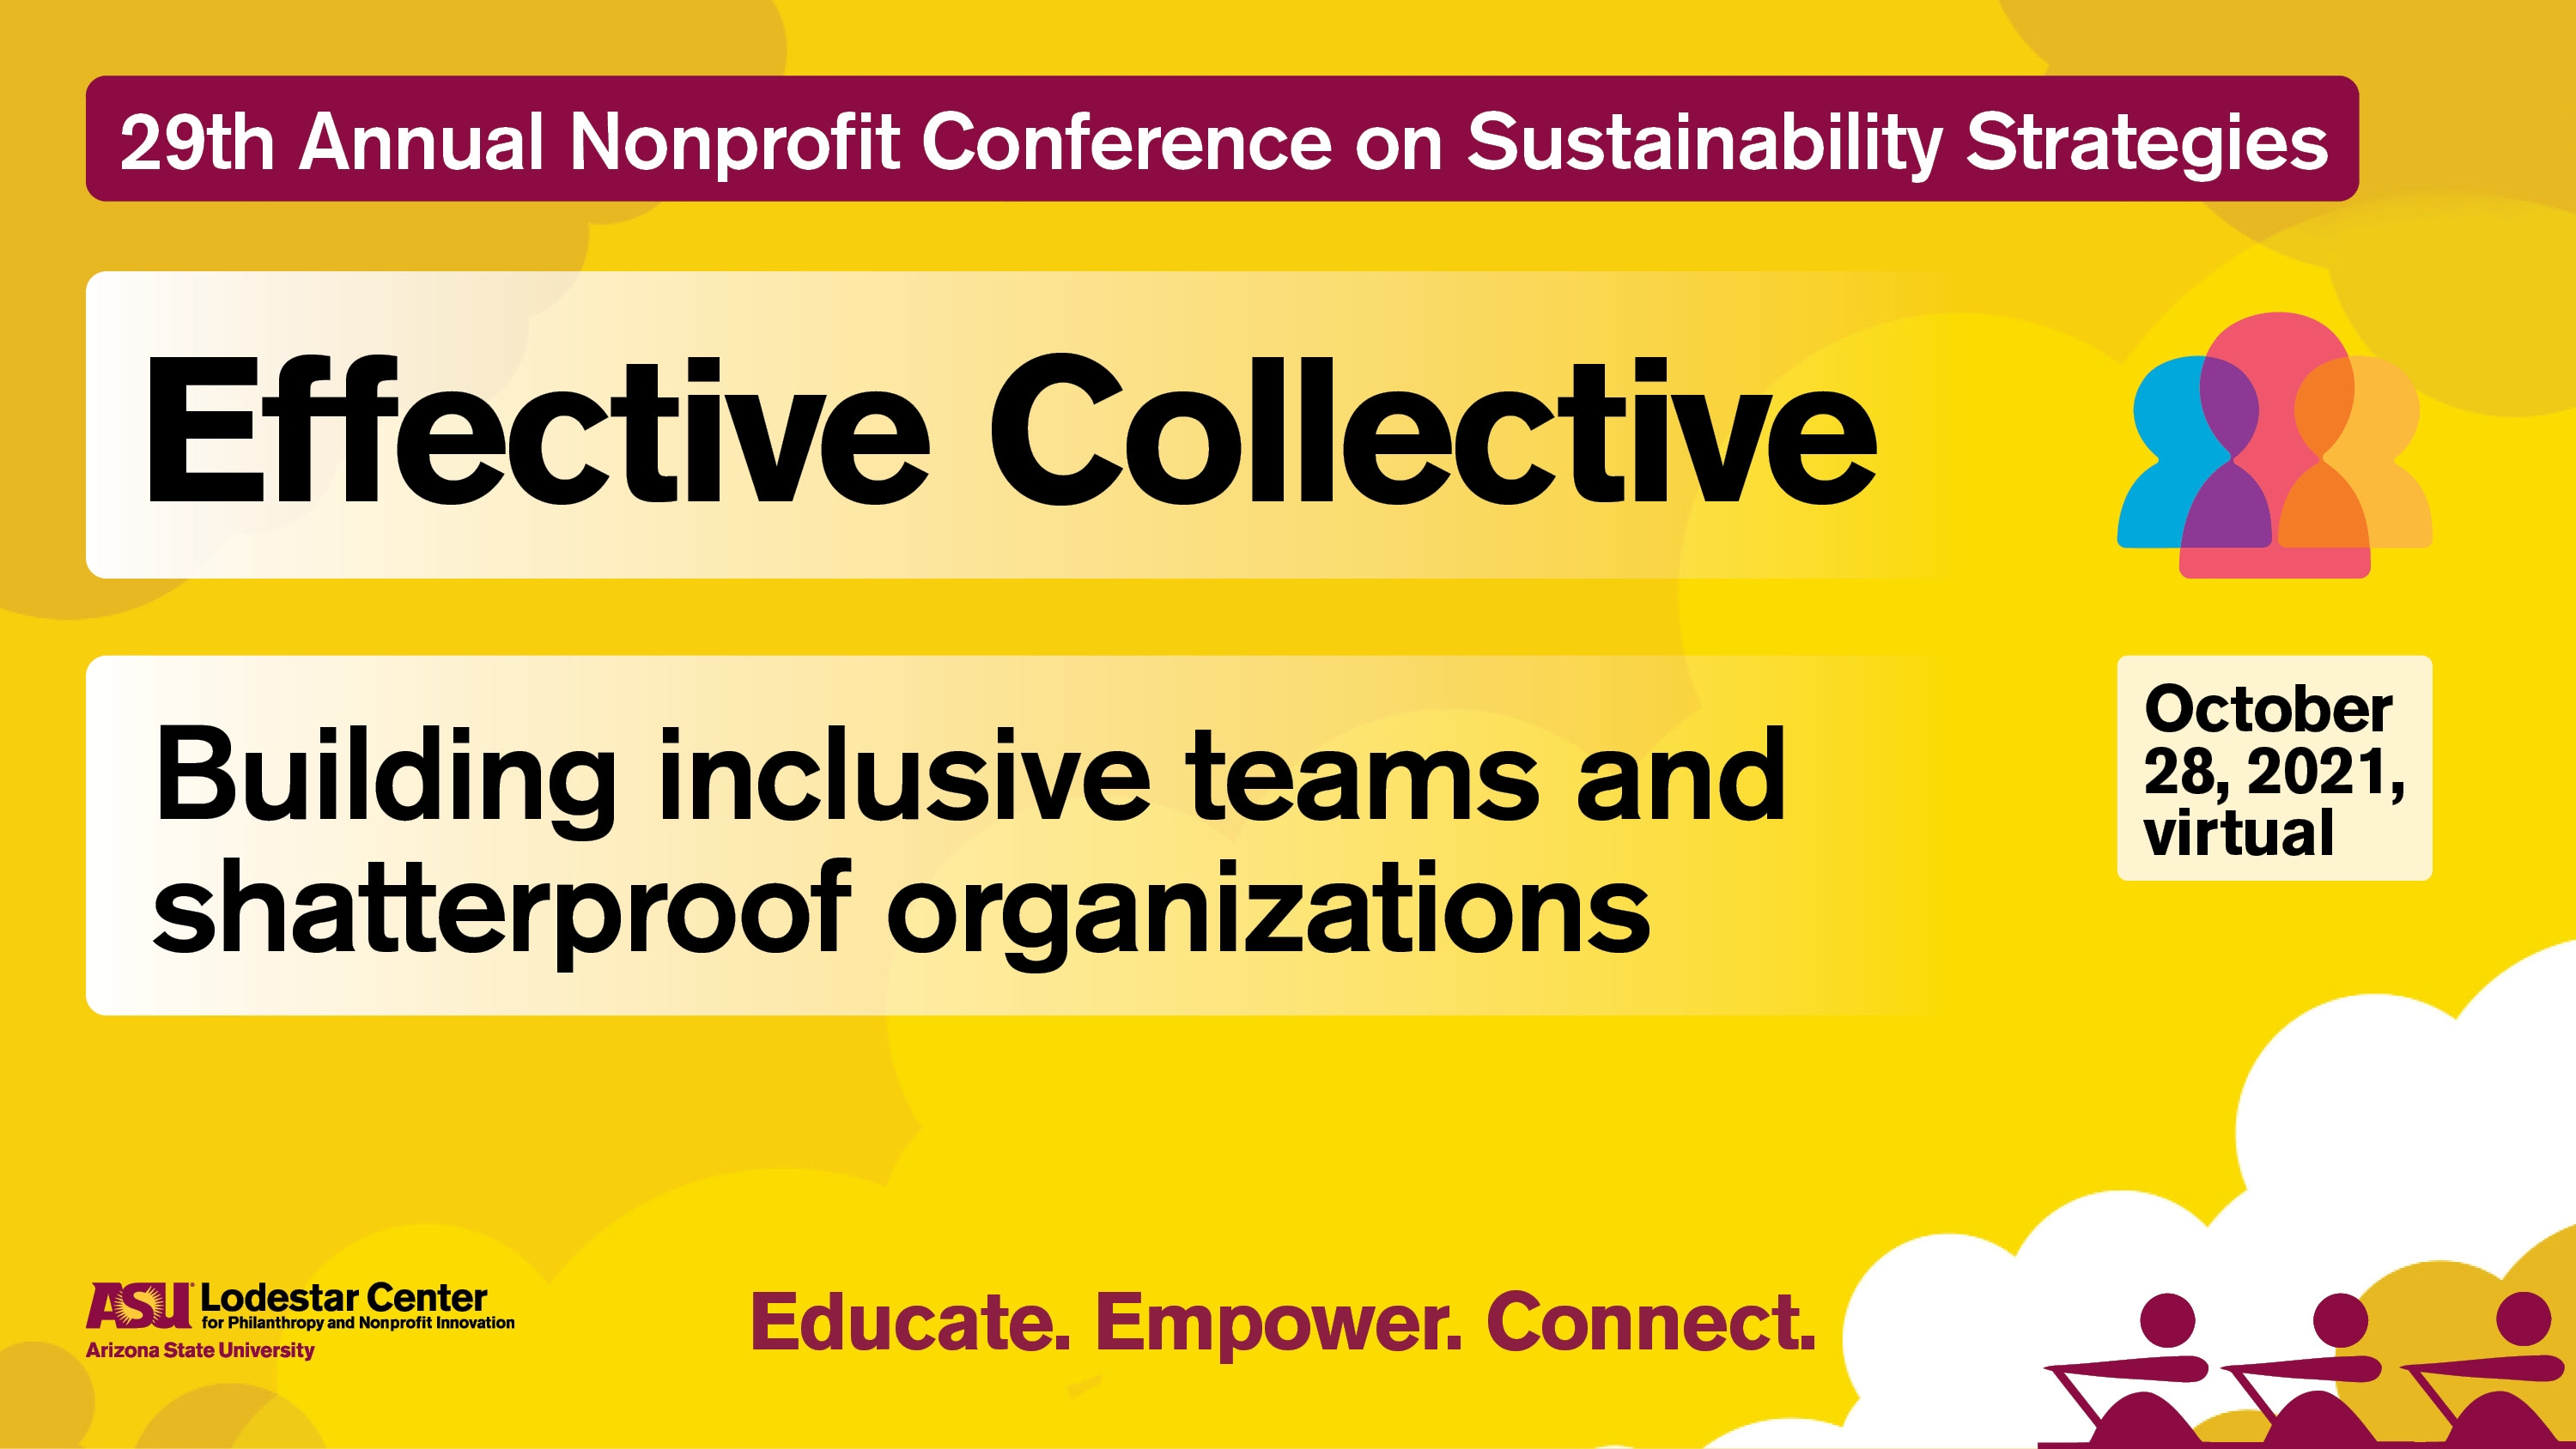 Conference advertisement, including the date, time, and purpose (building inclusive teams and shatterproof organizations).